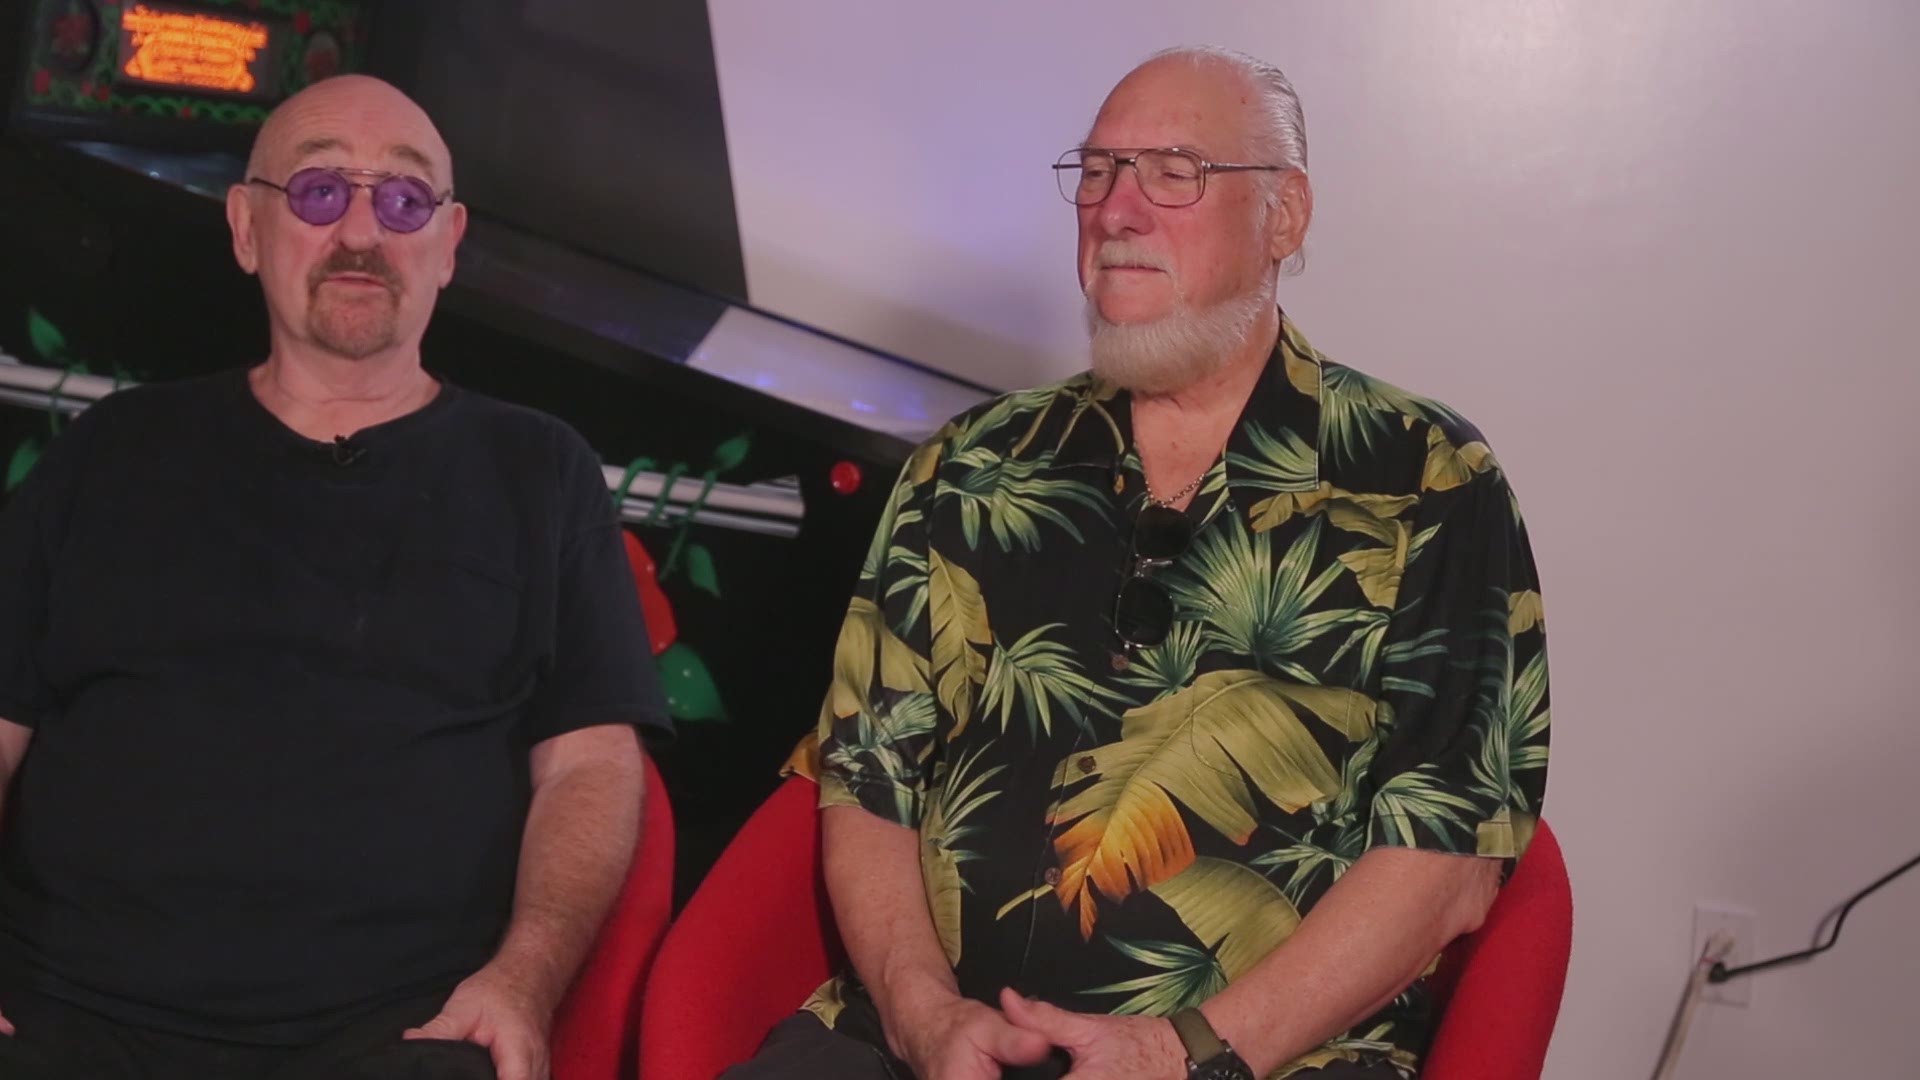 Rock and Roll Hall of Fame Inductees Dave Mason of Traffic and Steve Cropper of Booker T. and the M.G.'s visited the museum for a live interview and announce a partnership between the musicians and the museum that would benefit the Hall's education progra